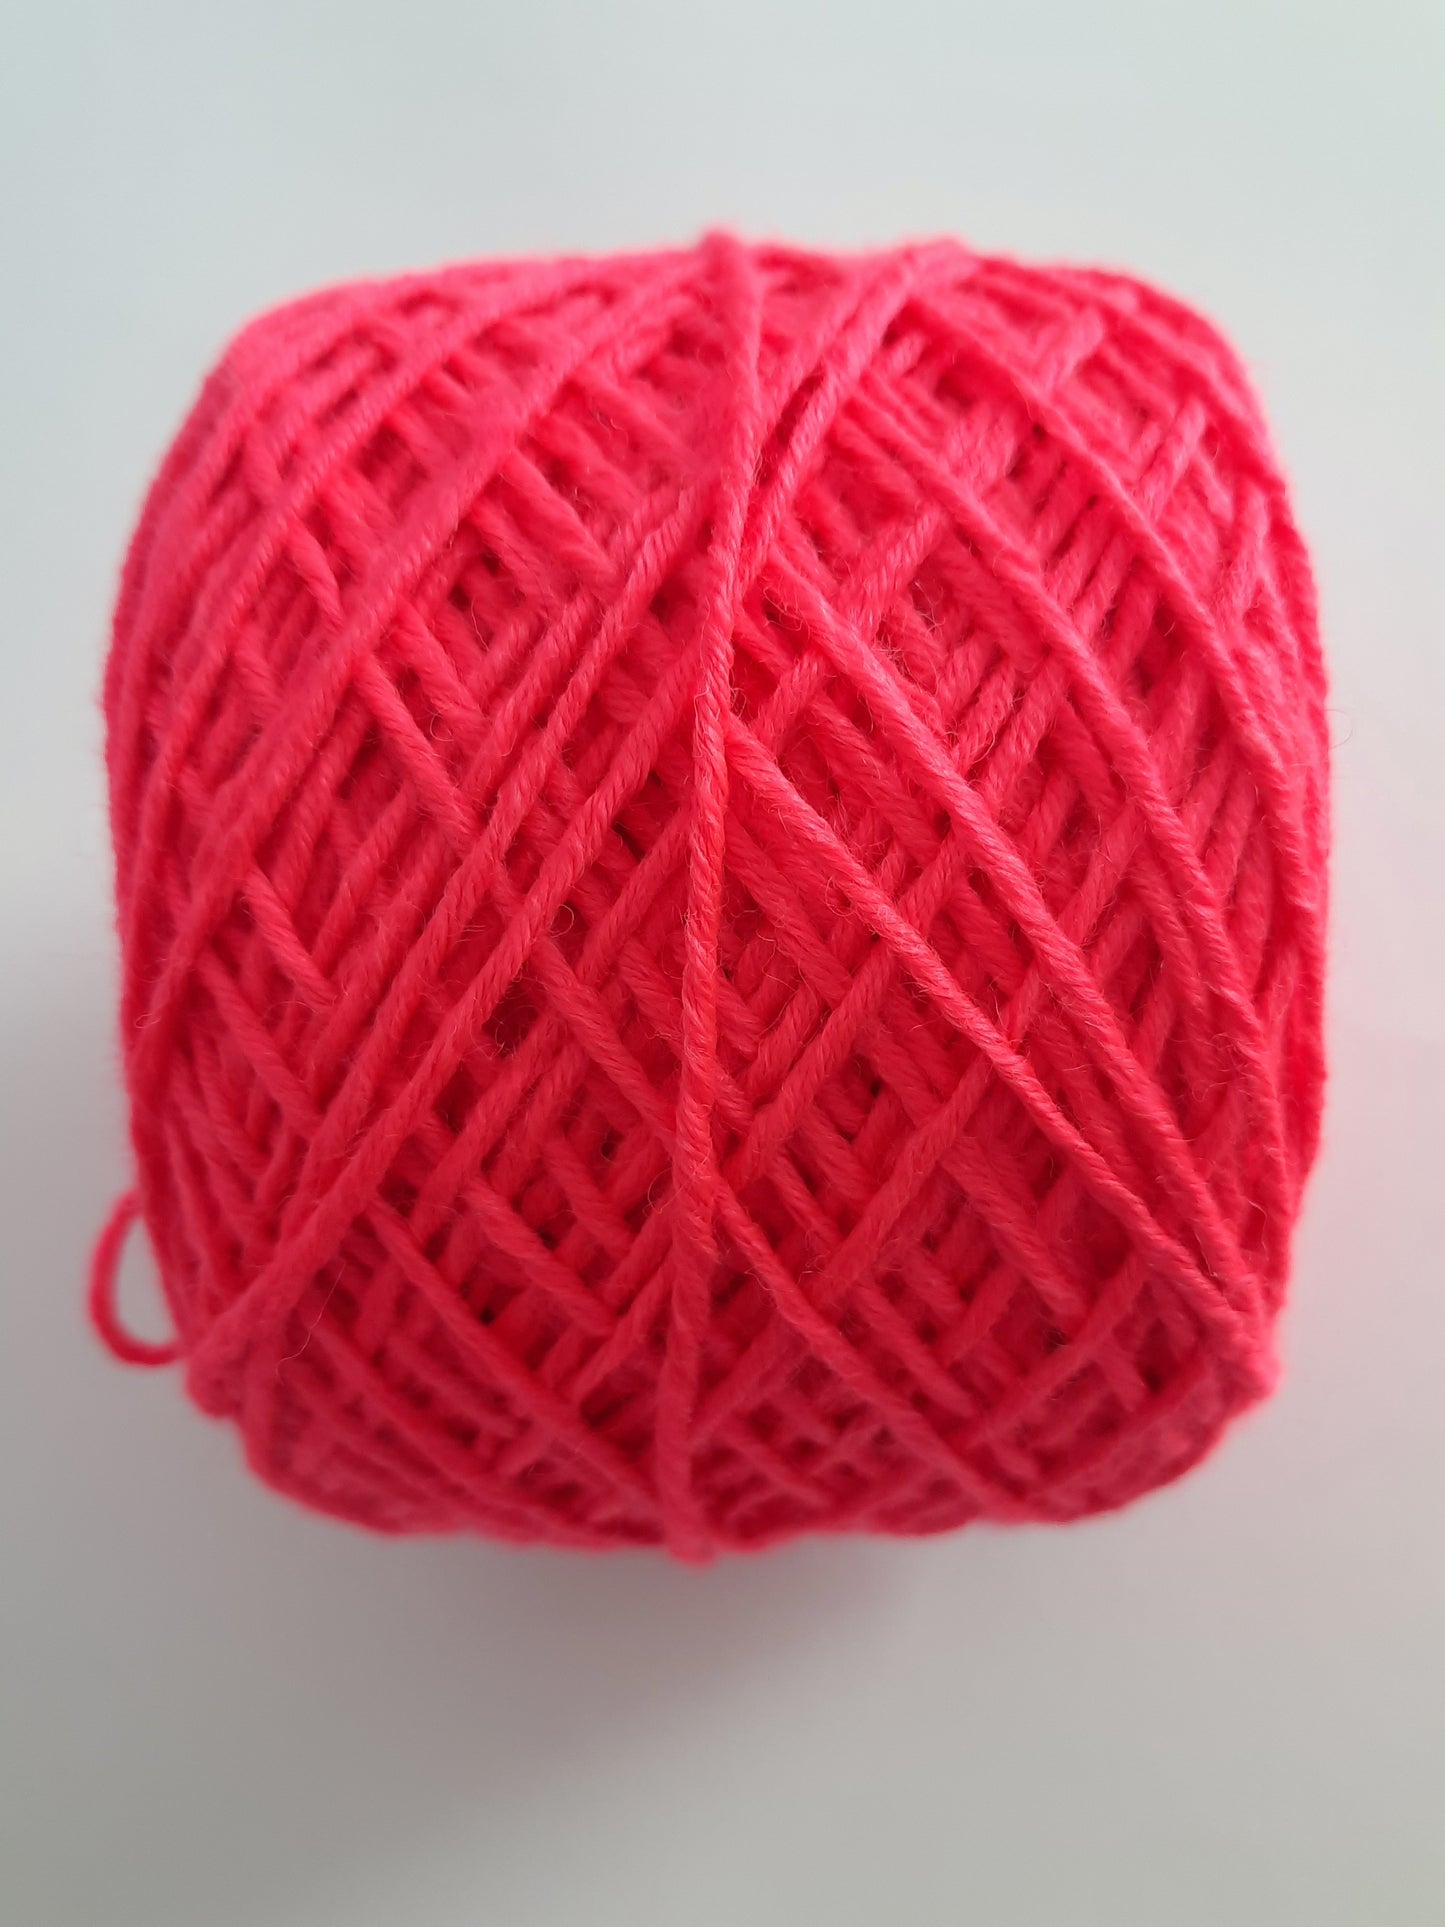 Mixed Coral Fluo Cotton 100gr